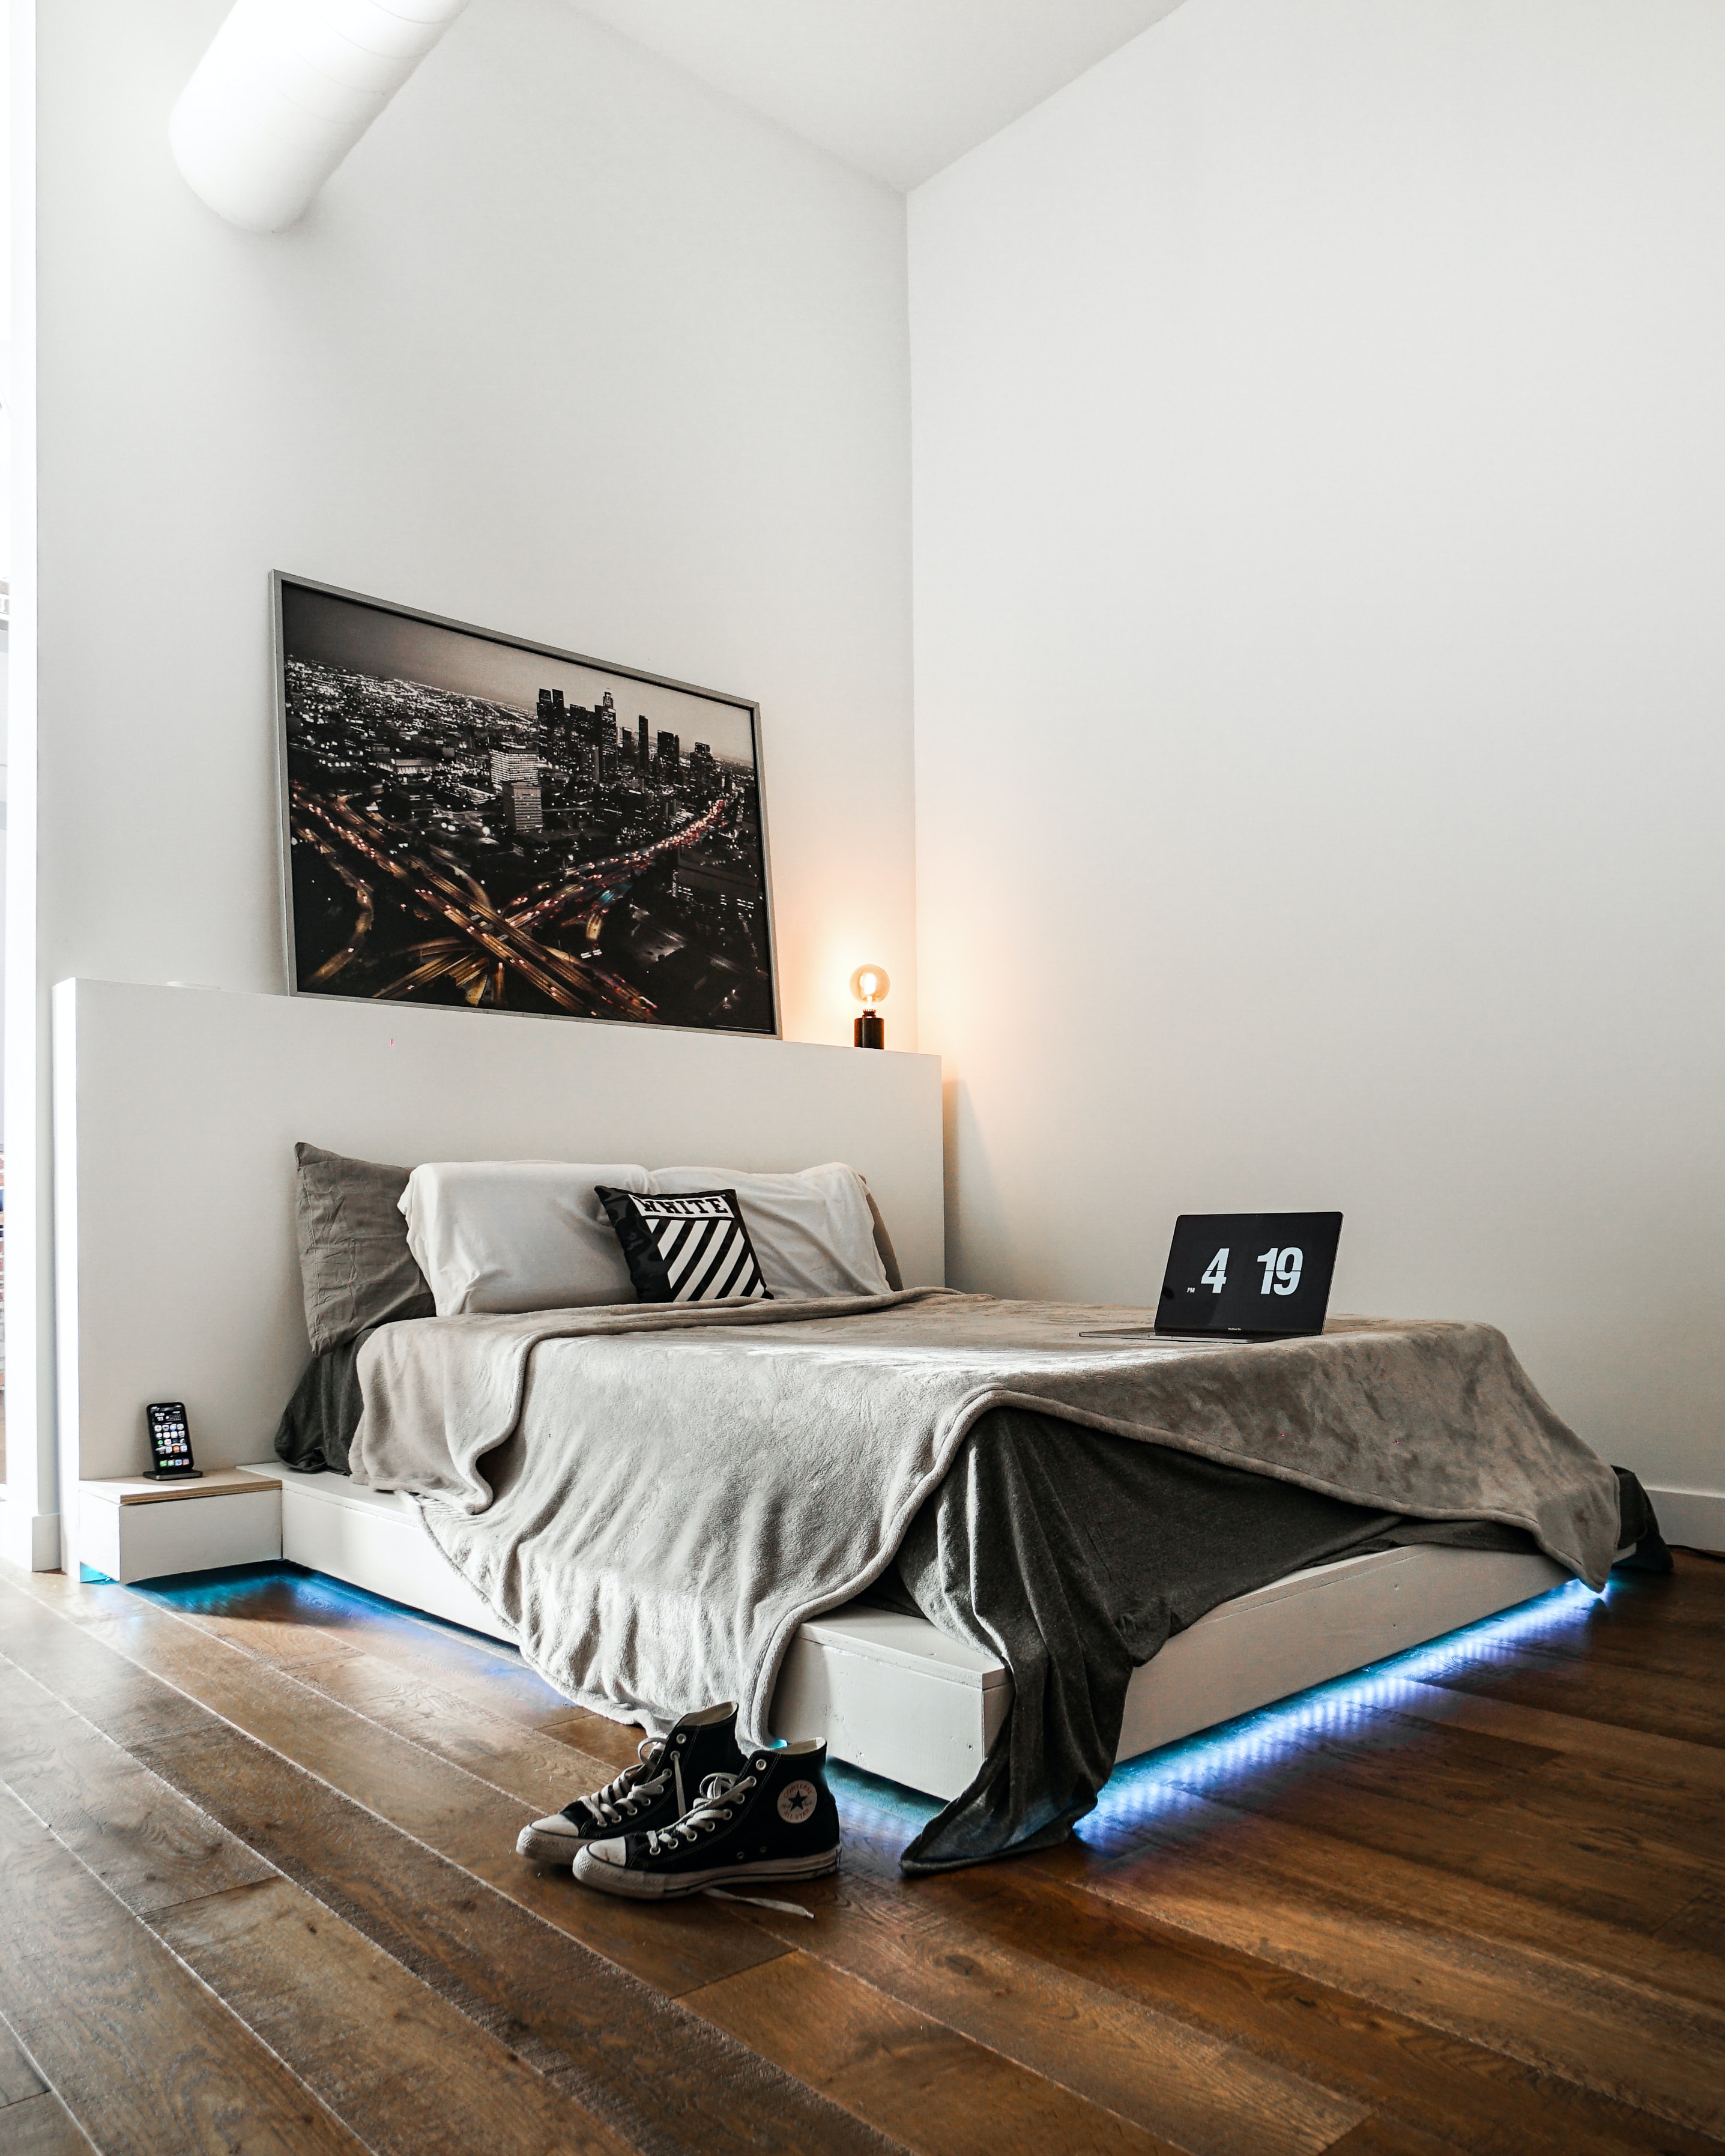 shoes, picture, bed, interior, miscellanea, miscellaneous, sneakers, room Full HD